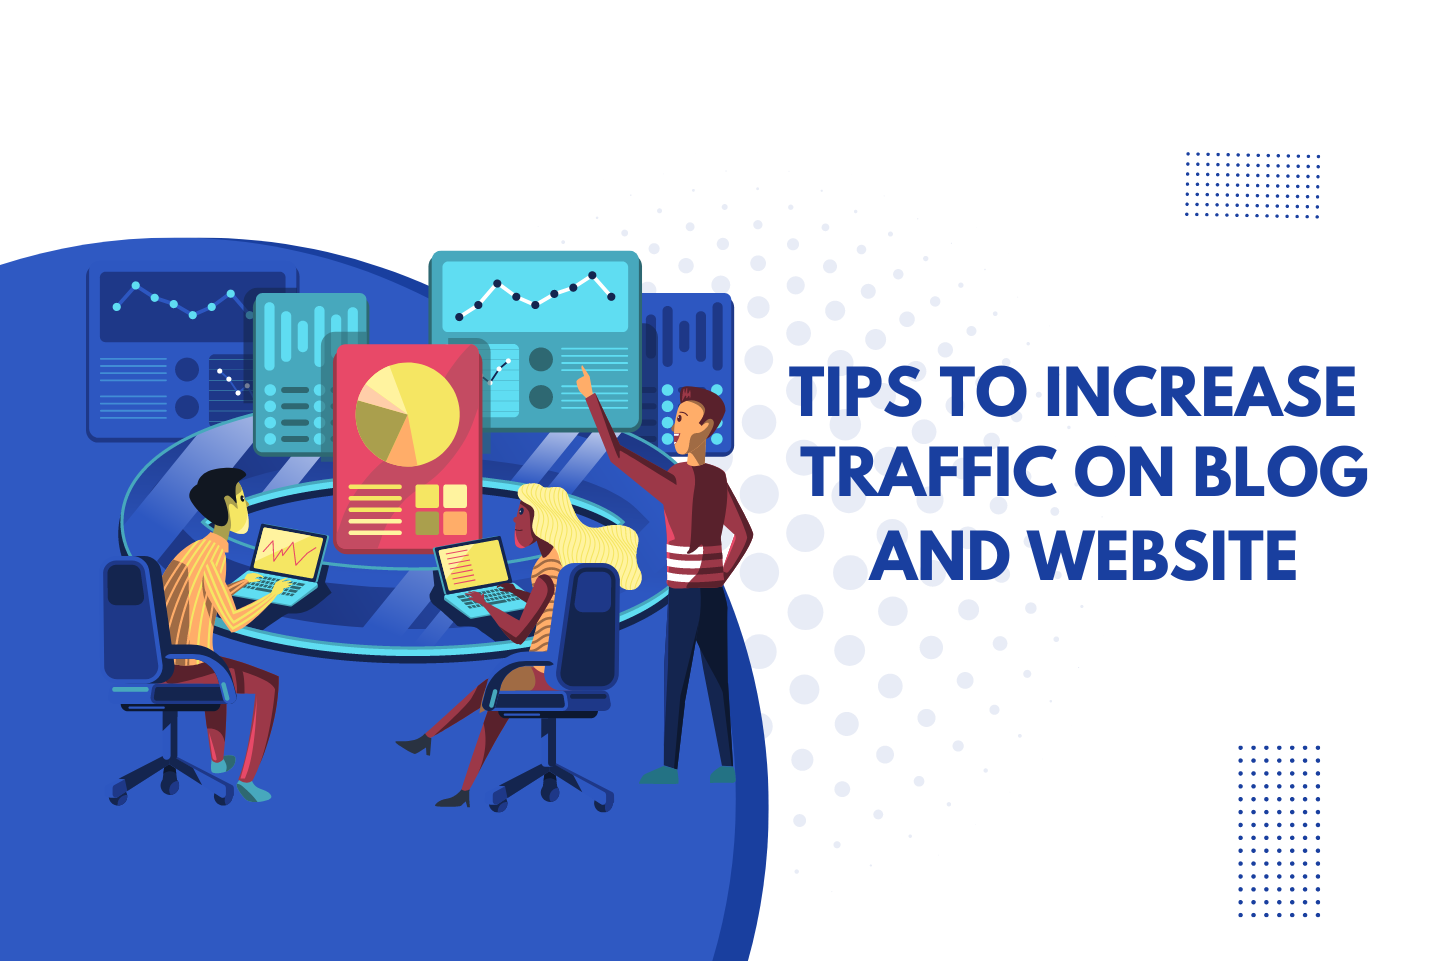 Tips on How to Increase Traffic on Blog and Website?